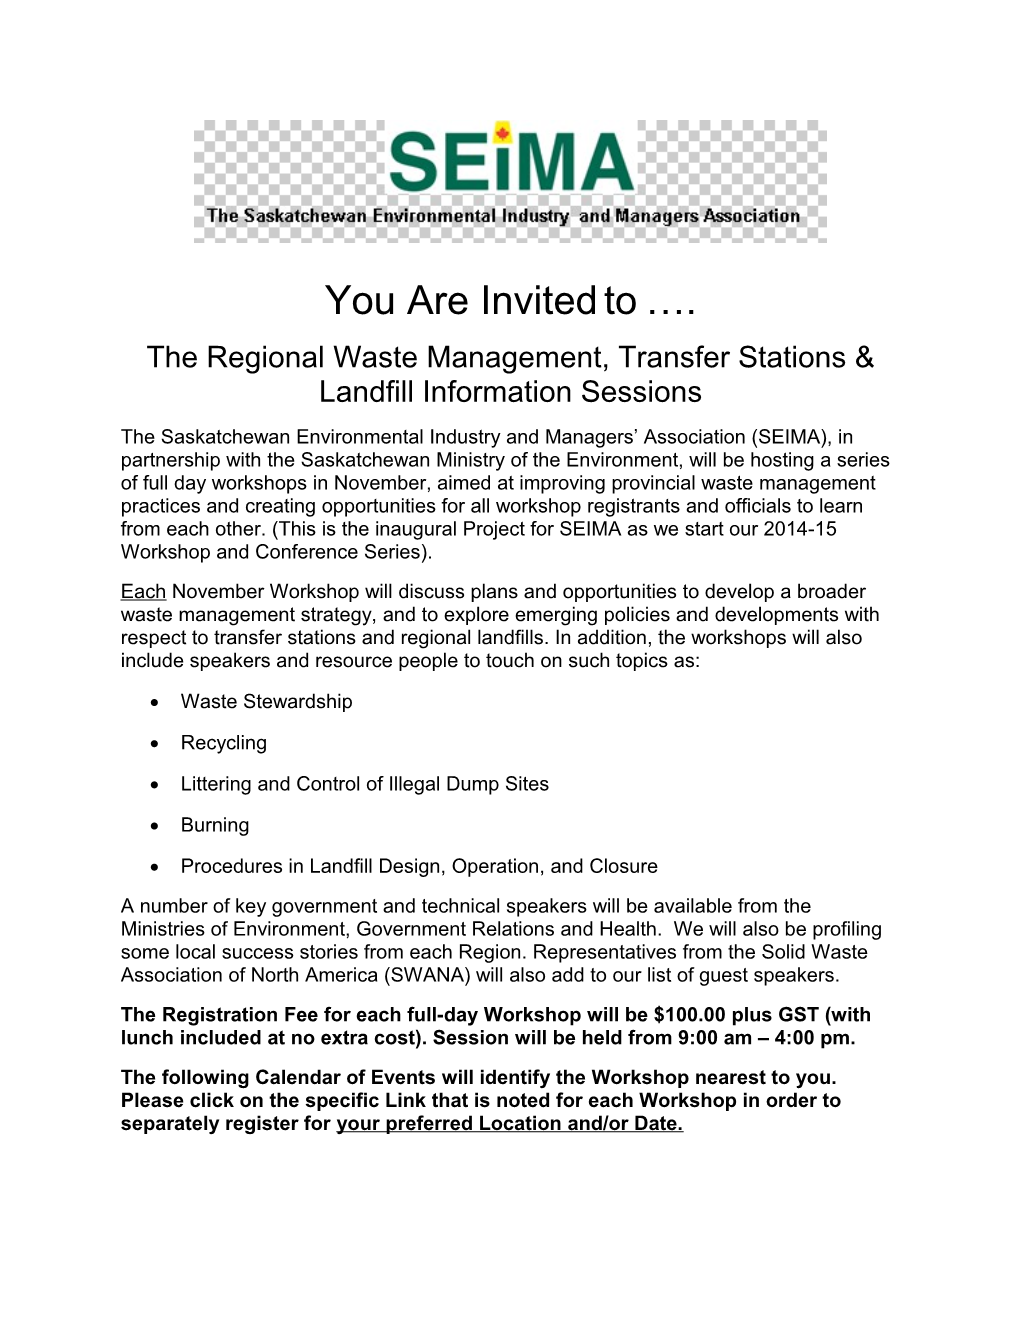 The Regional Waste Management, Transfer Stations & Landfill Information Sessions